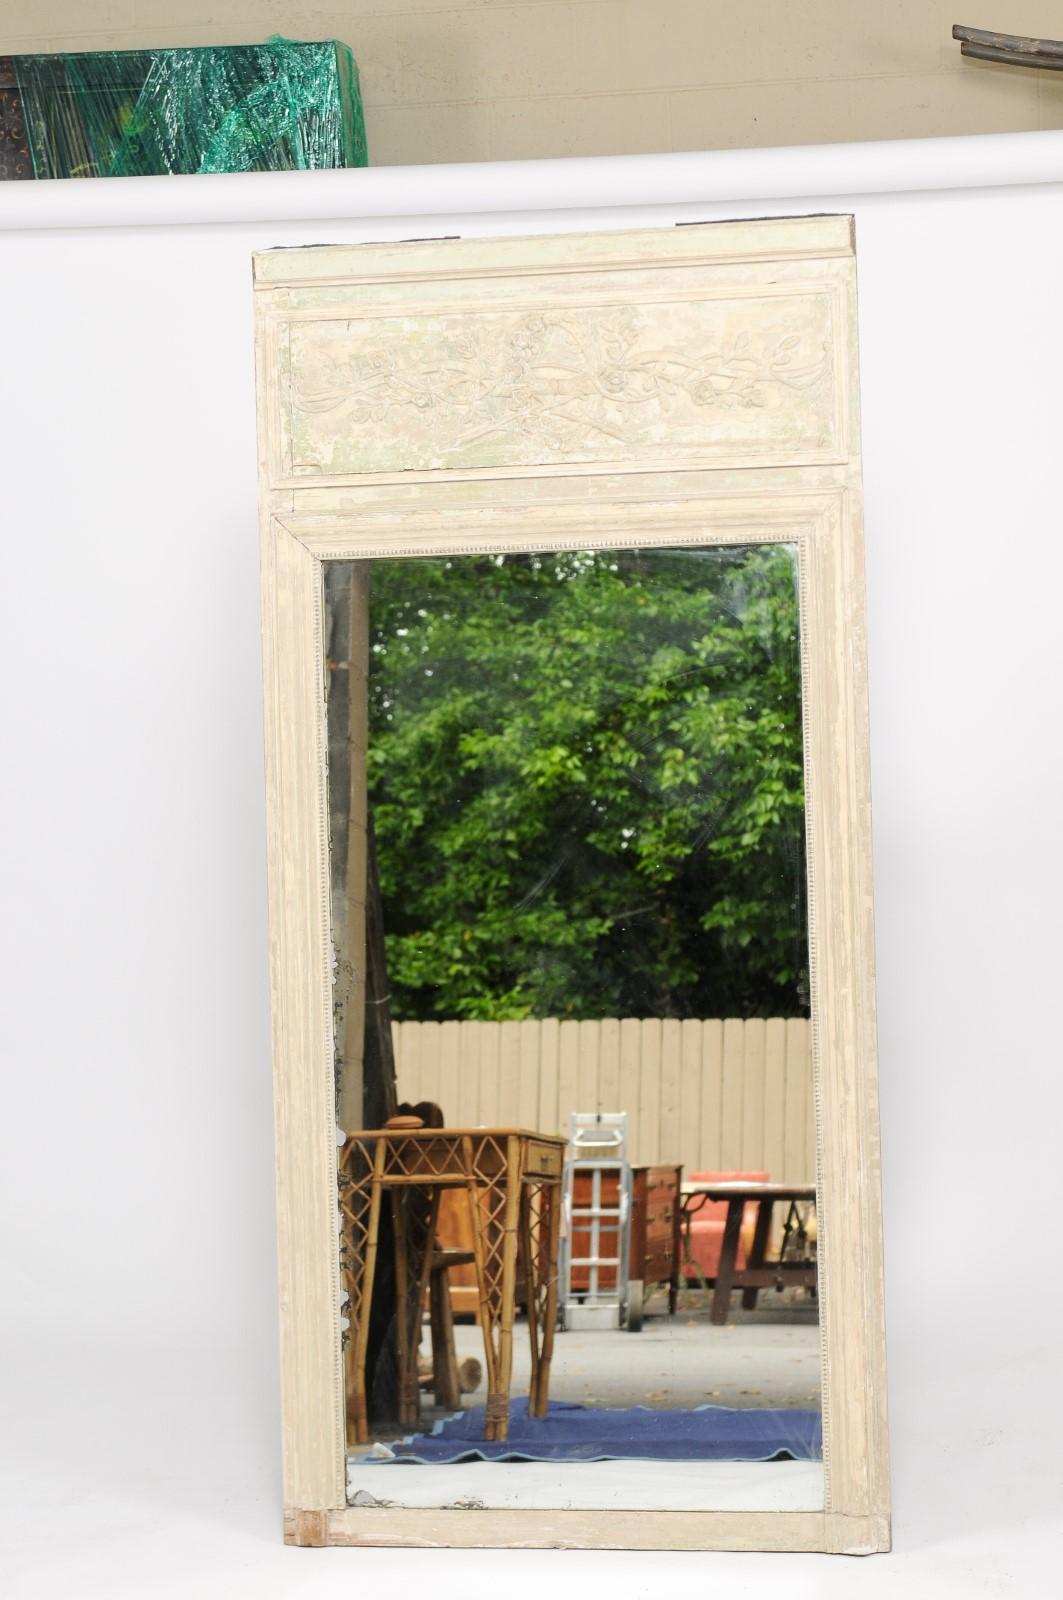 A French Louis XVI style painted trumeau mirror from the mid-19th century, with original mercury glass, weathered patina and foliage décor. From an apartment in Paris, a 19th century trumeau mirror that has all the age and patina that makes it